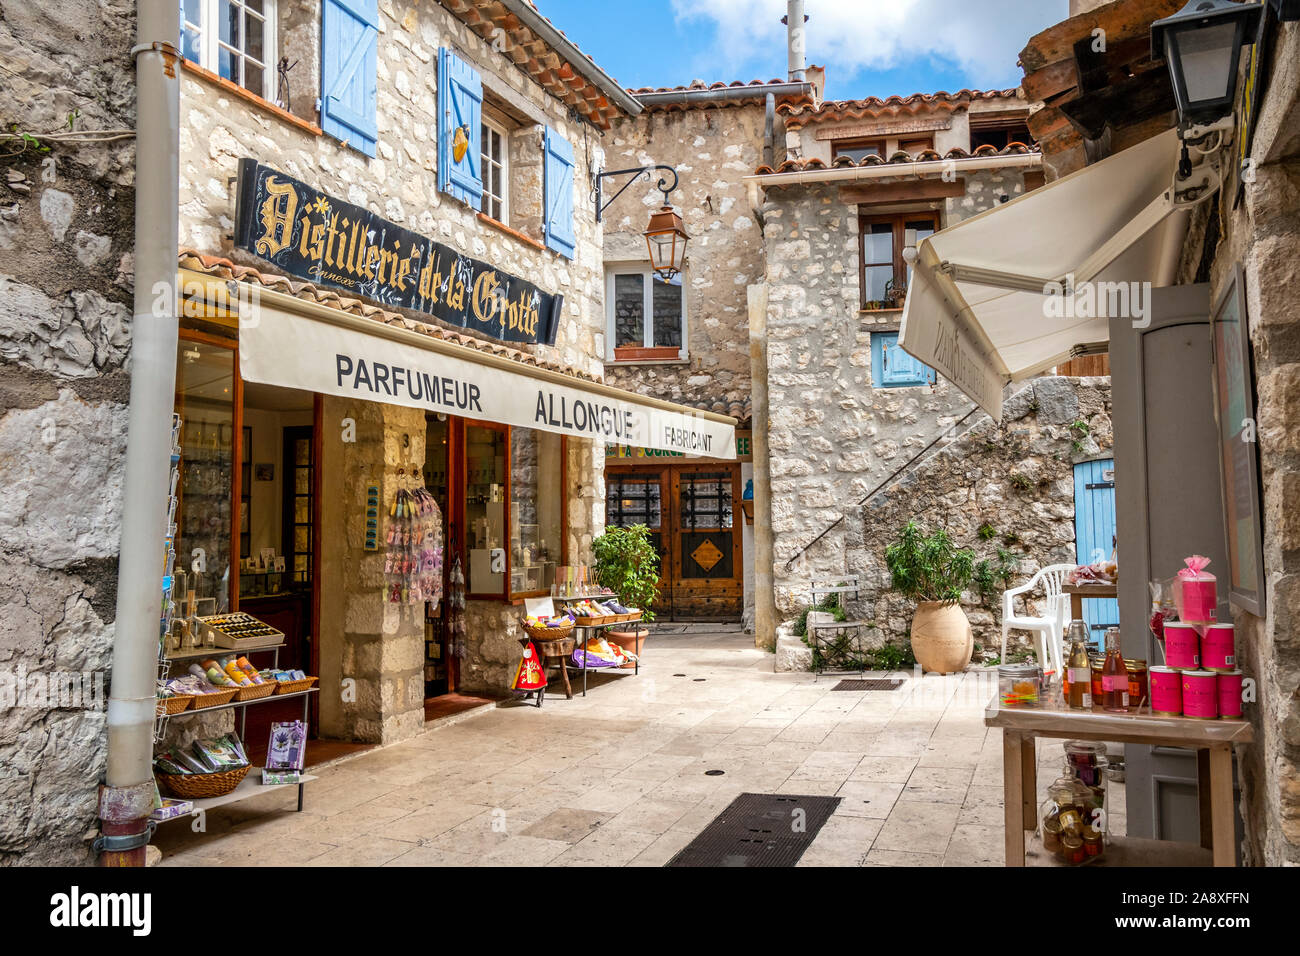 A picturesque, quaint shop in the medieval hilltop village of Gourdon, in the Alpes Maritime section of Southern France Stock Photo